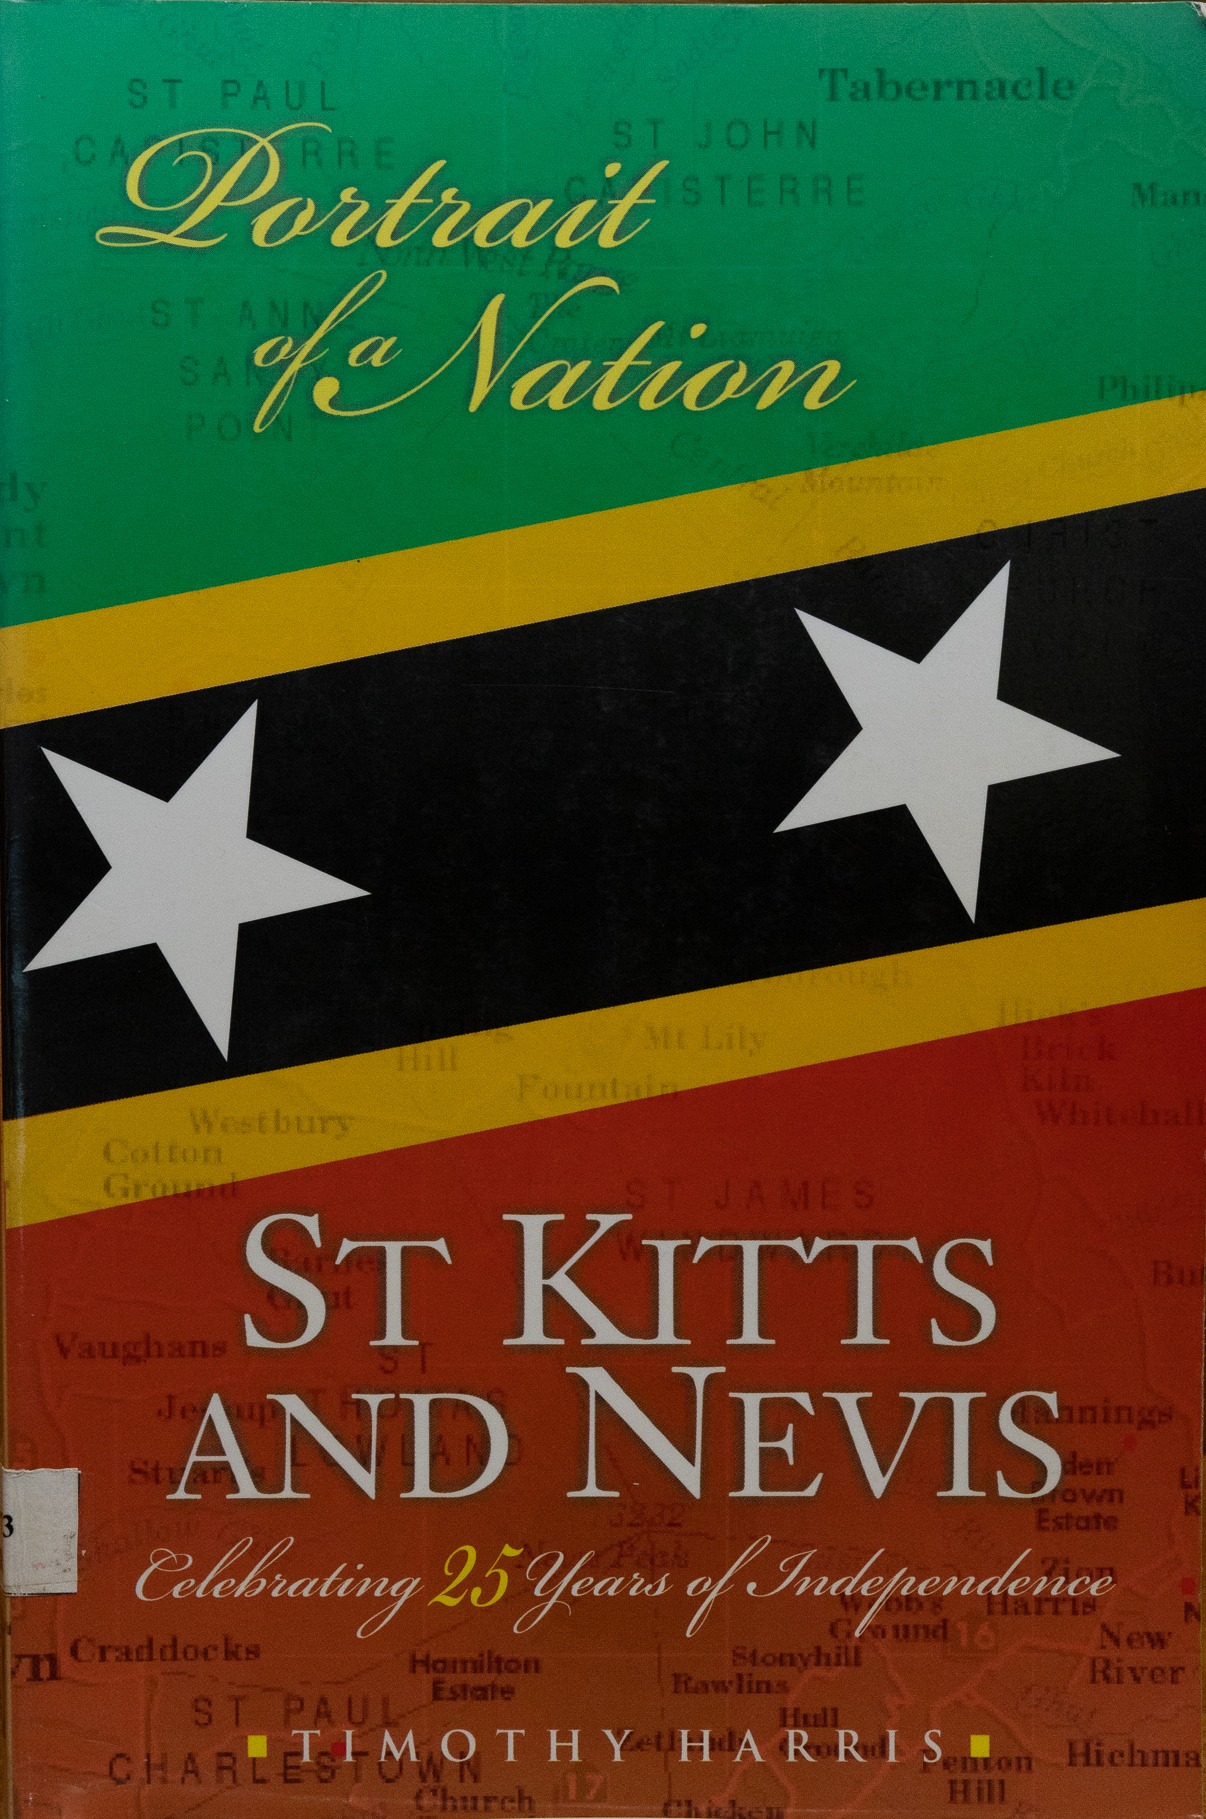 St. Kitts and Nevis-Portrait of a Nation Celebrating 25 Years of Independences